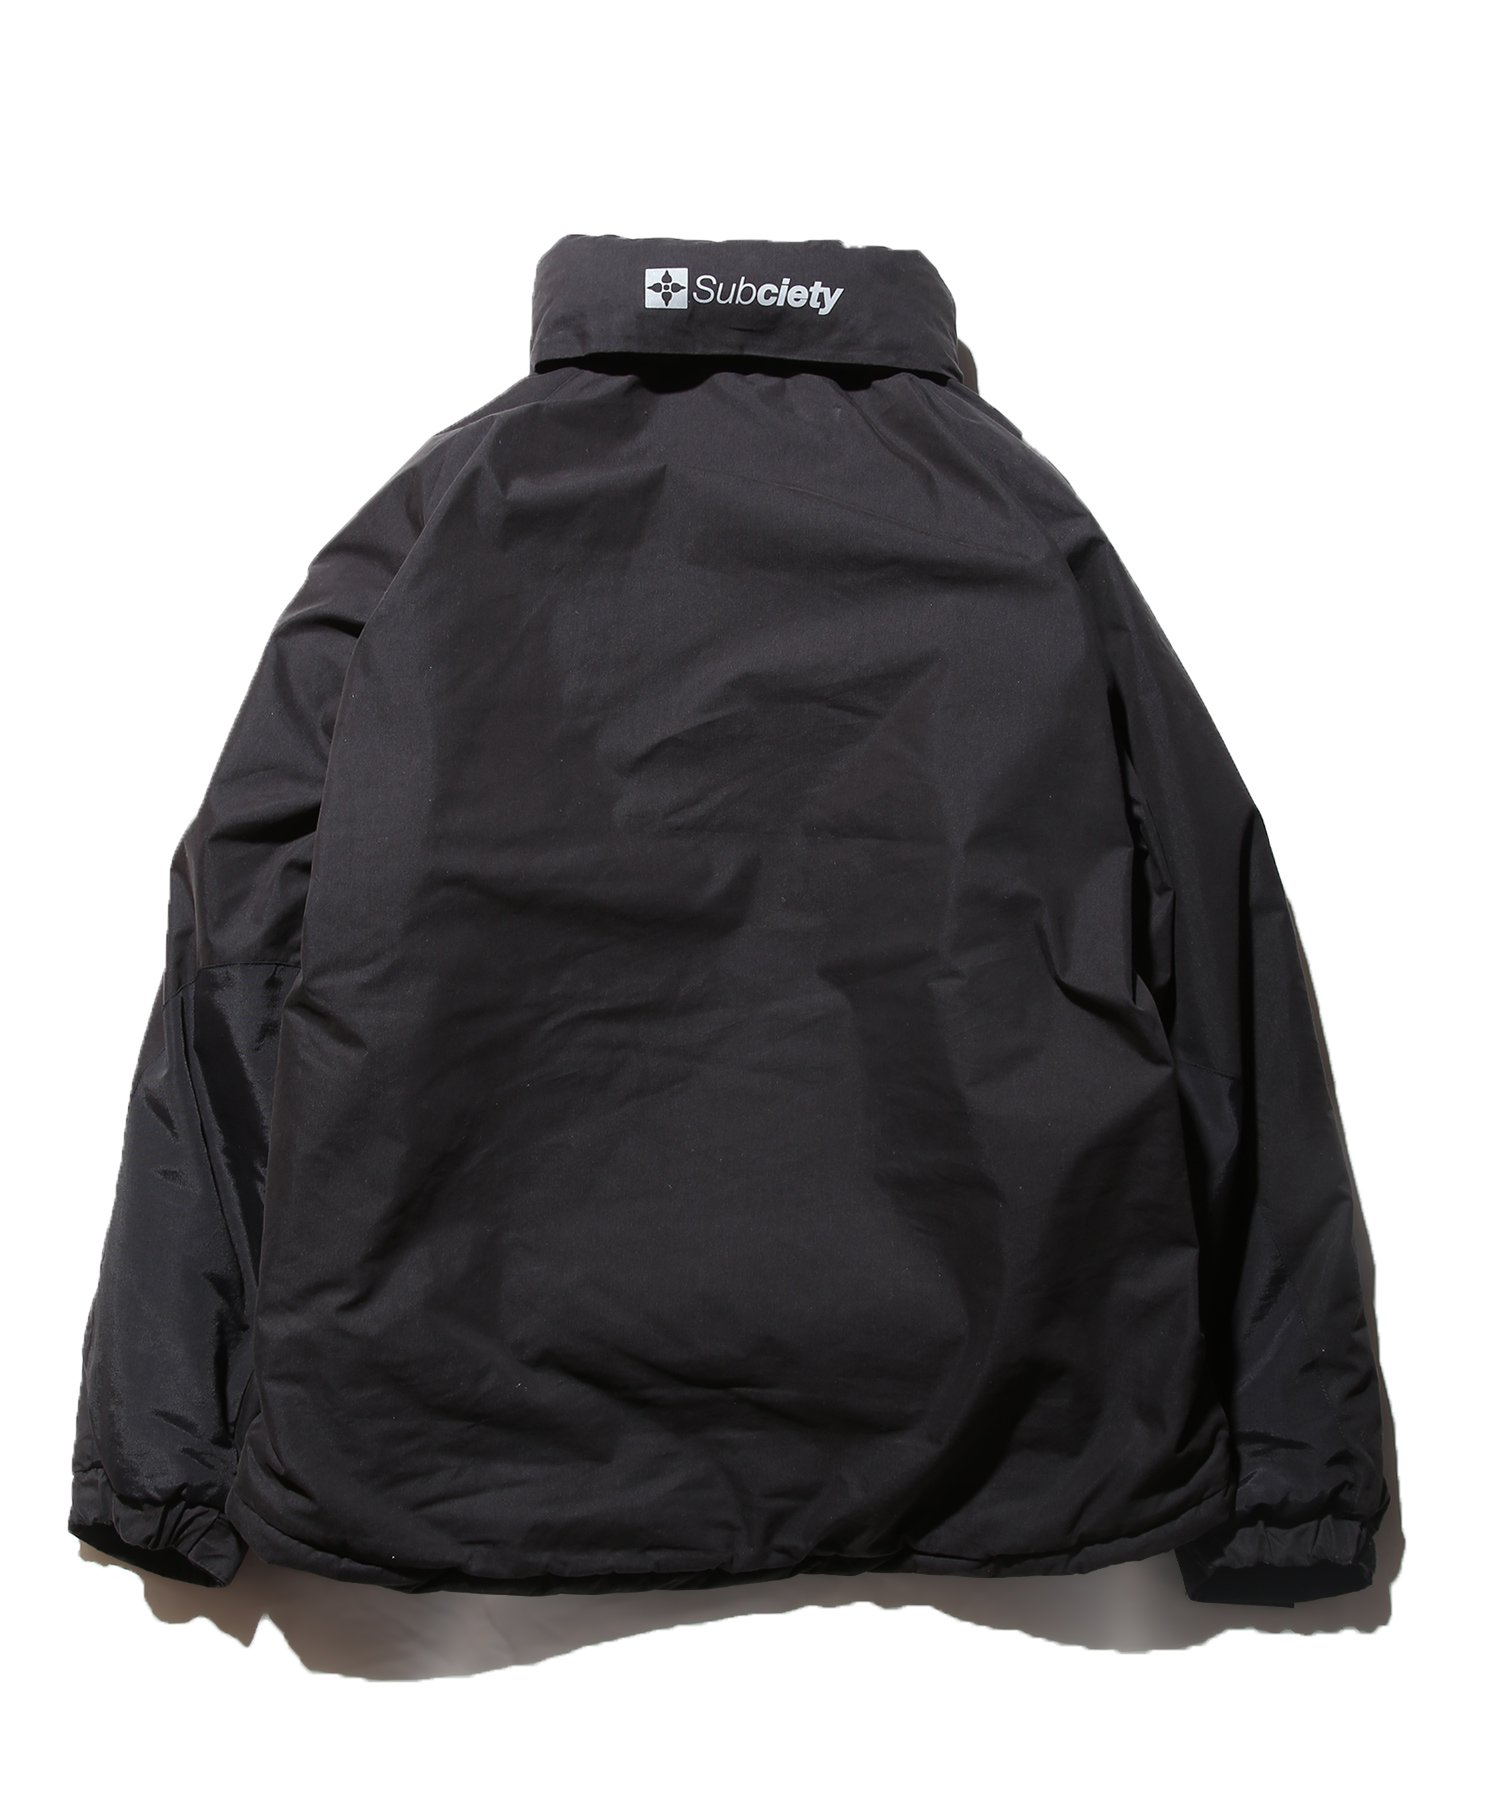 Subciety Military Puff Jacket | www.gamutgallerympls.com